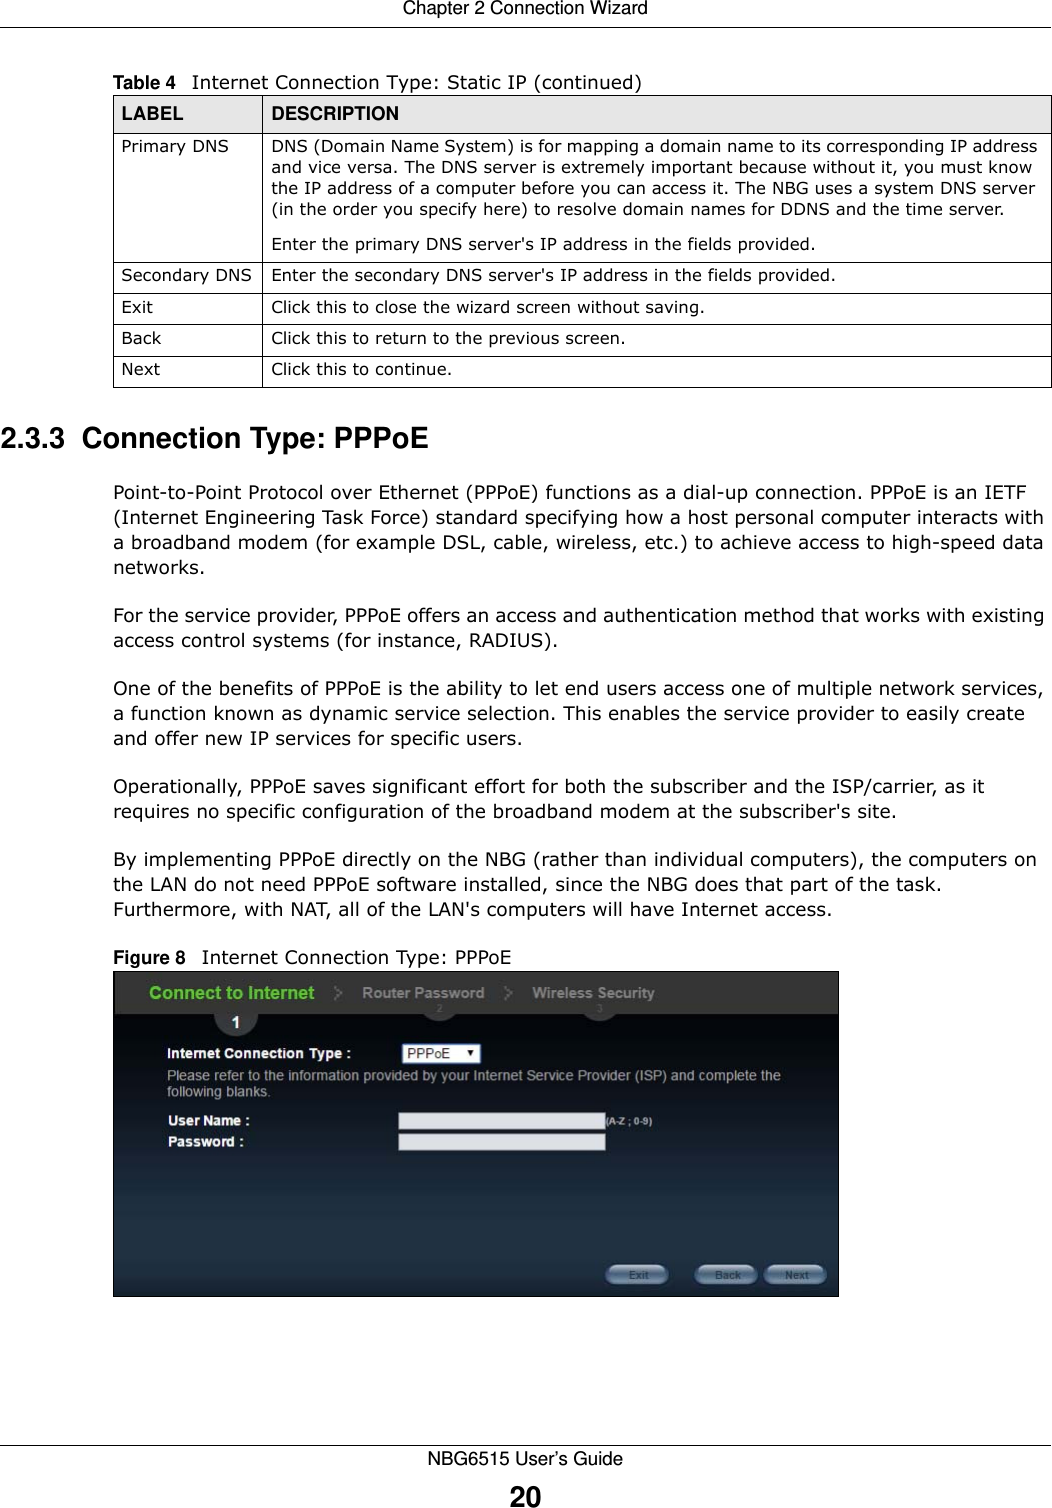 Chapter 2 Connection WizardNBG6515 User’s Guide202.3.3  Connection Type: PPPoEPoint-to-Point Protocol over Ethernet (PPPoE) functions as a dial-up connection. PPPoE is an IETF (Internet Engineering Task Force) standard specifying how a host personal computer interacts with a broadband modem (for example DSL, cable, wireless, etc.) to achieve access to high-speed data networks.For the service provider, PPPoE offers an access and authentication method that works with existing access control systems (for instance, RADIUS). One of the benefits of PPPoE is the ability to let end users access one of multiple network services, a function known as dynamic service selection. This enables the service provider to easily create and offer new IP services for specific users.Operationally, PPPoE saves significant effort for both the subscriber and the ISP/carrier, as it requires no specific configuration of the broadband modem at the subscriber&apos;s site.By implementing PPPoE directly on the NBG (rather than individual computers), the computers on the LAN do not need PPPoE software installed, since the NBG does that part of the task. Furthermore, with NAT, all of the LAN&apos;s computers will have Internet access.Figure 8   Internet Connection Type: PPPoE Primary DNS DNS (Domain Name System) is for mapping a domain name to its corresponding IP address and vice versa. The DNS server is extremely important because without it, you must know the IP address of a computer before you can access it. The NBG uses a system DNS server (in the order you specify here) to resolve domain names for DDNS and the time server.Enter the primary DNS server&apos;s IP address in the fields provided.Secondary DNS Enter the secondary DNS server&apos;s IP address in the fields provided.Exit Click this to close the wizard screen without saving.Back Click this to return to the previous screen.Next Click this to continue. Table 4   Internet Connection Type: Static IP (continued)LABEL DESCRIPTION